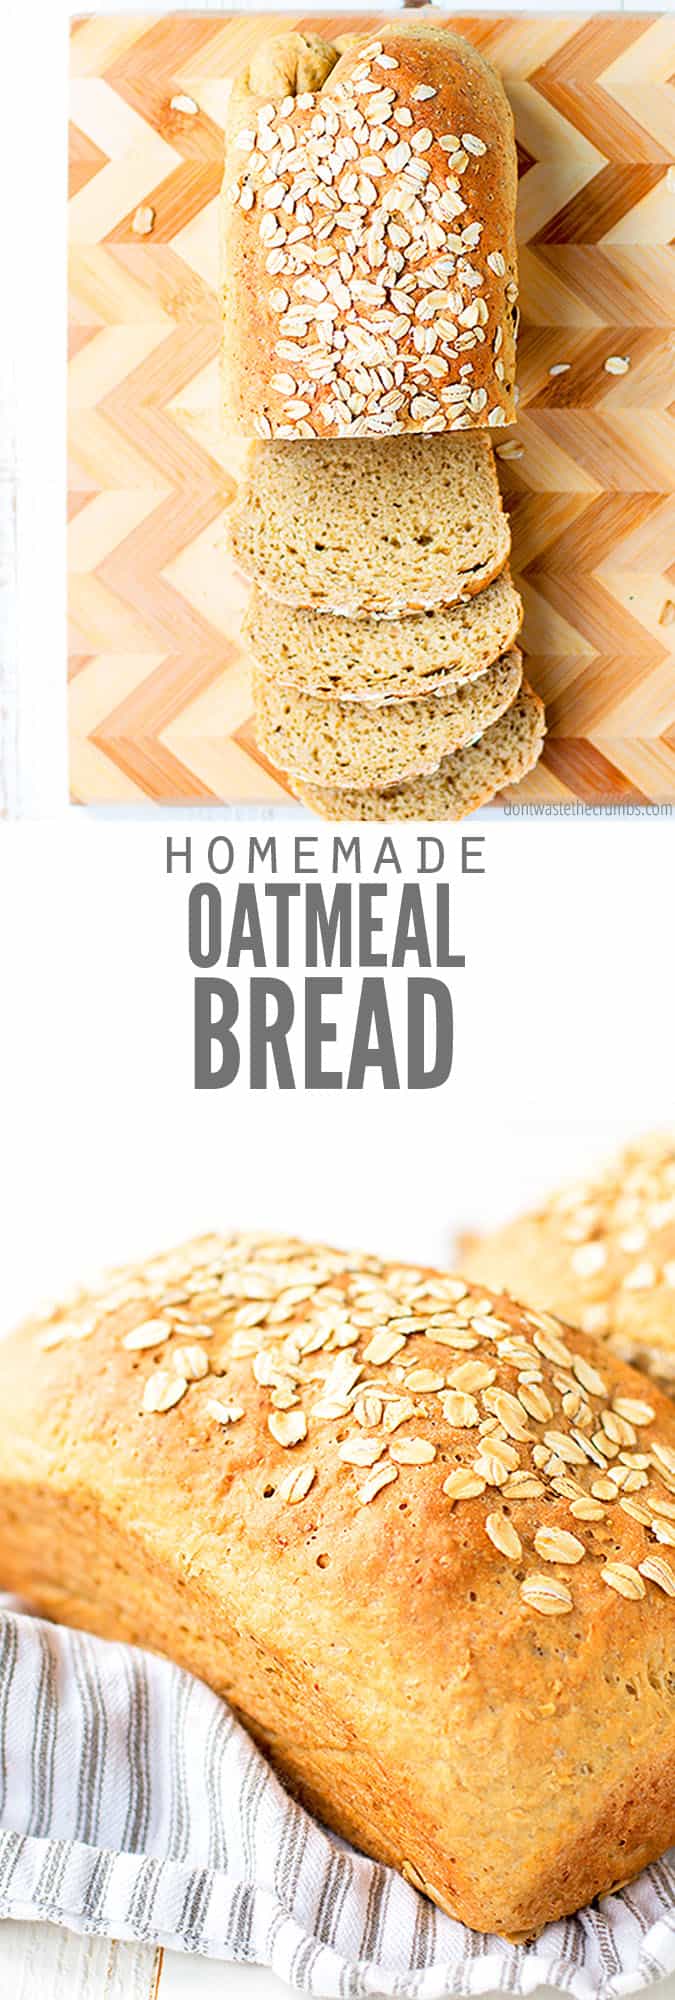 Oatmeal Bread Recipe (healthy & easy!) - Don't Waste the Crumbs